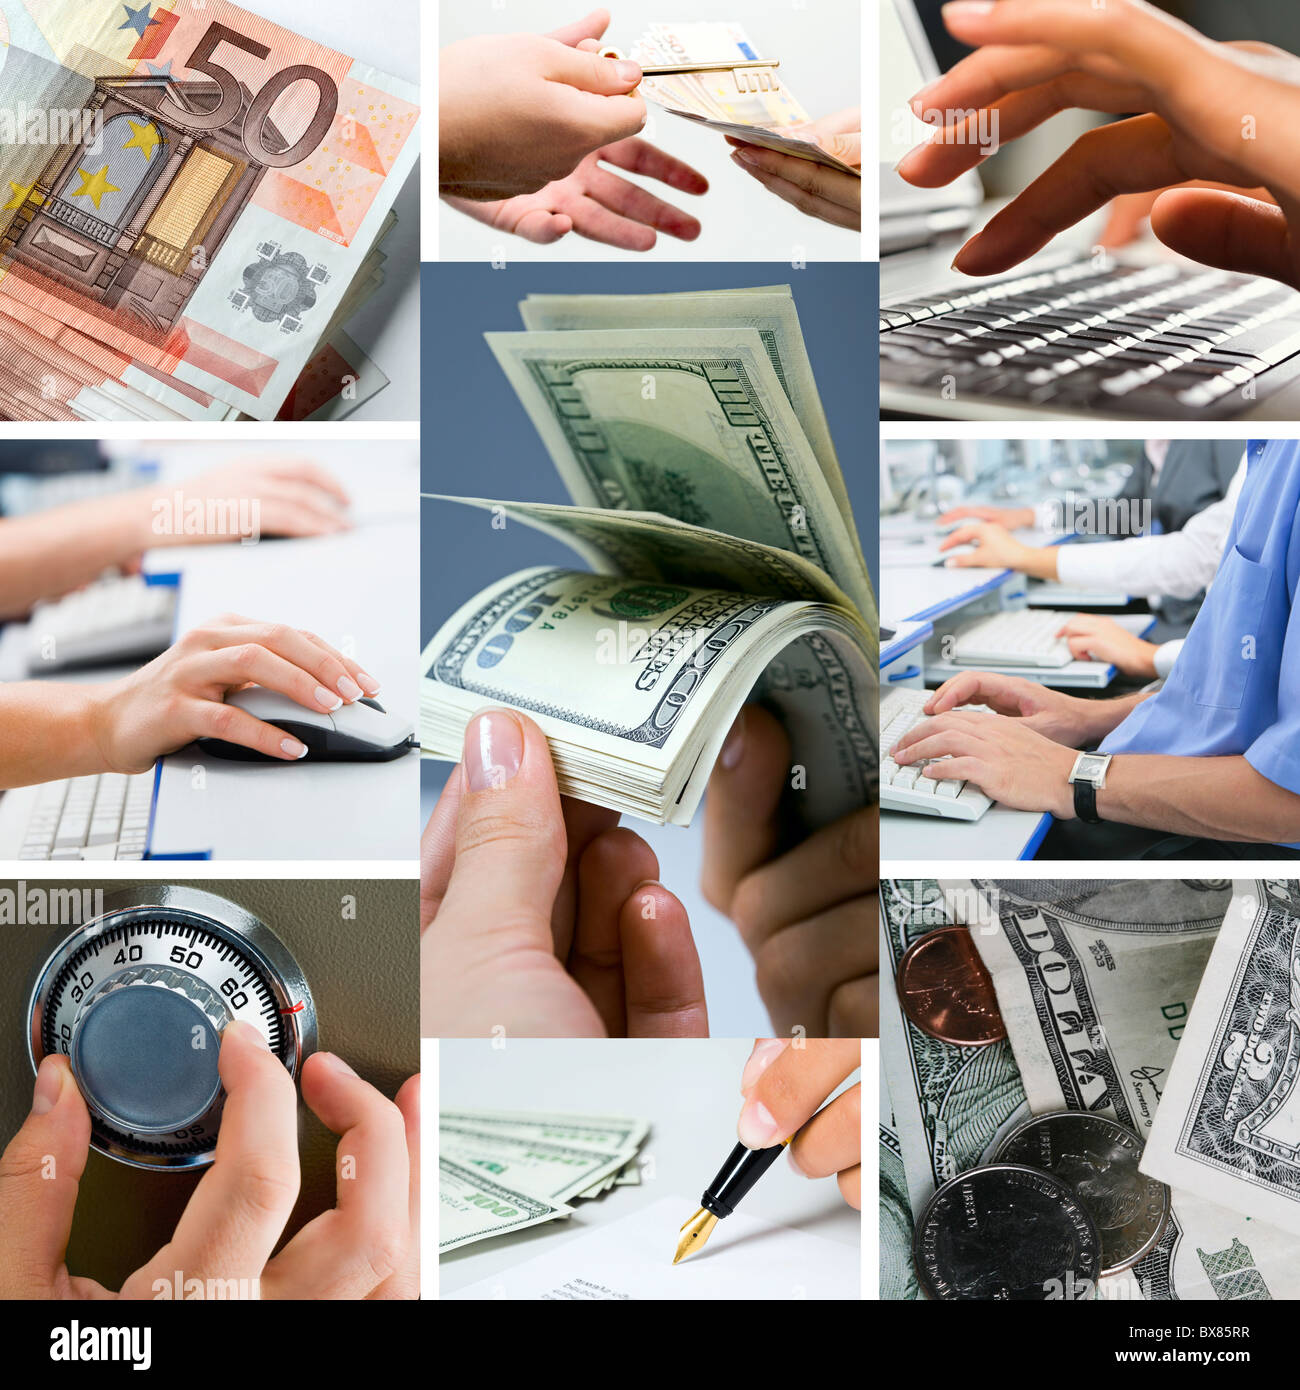 Conceptual image - grid of business photos: white collars’ money Stock Photo